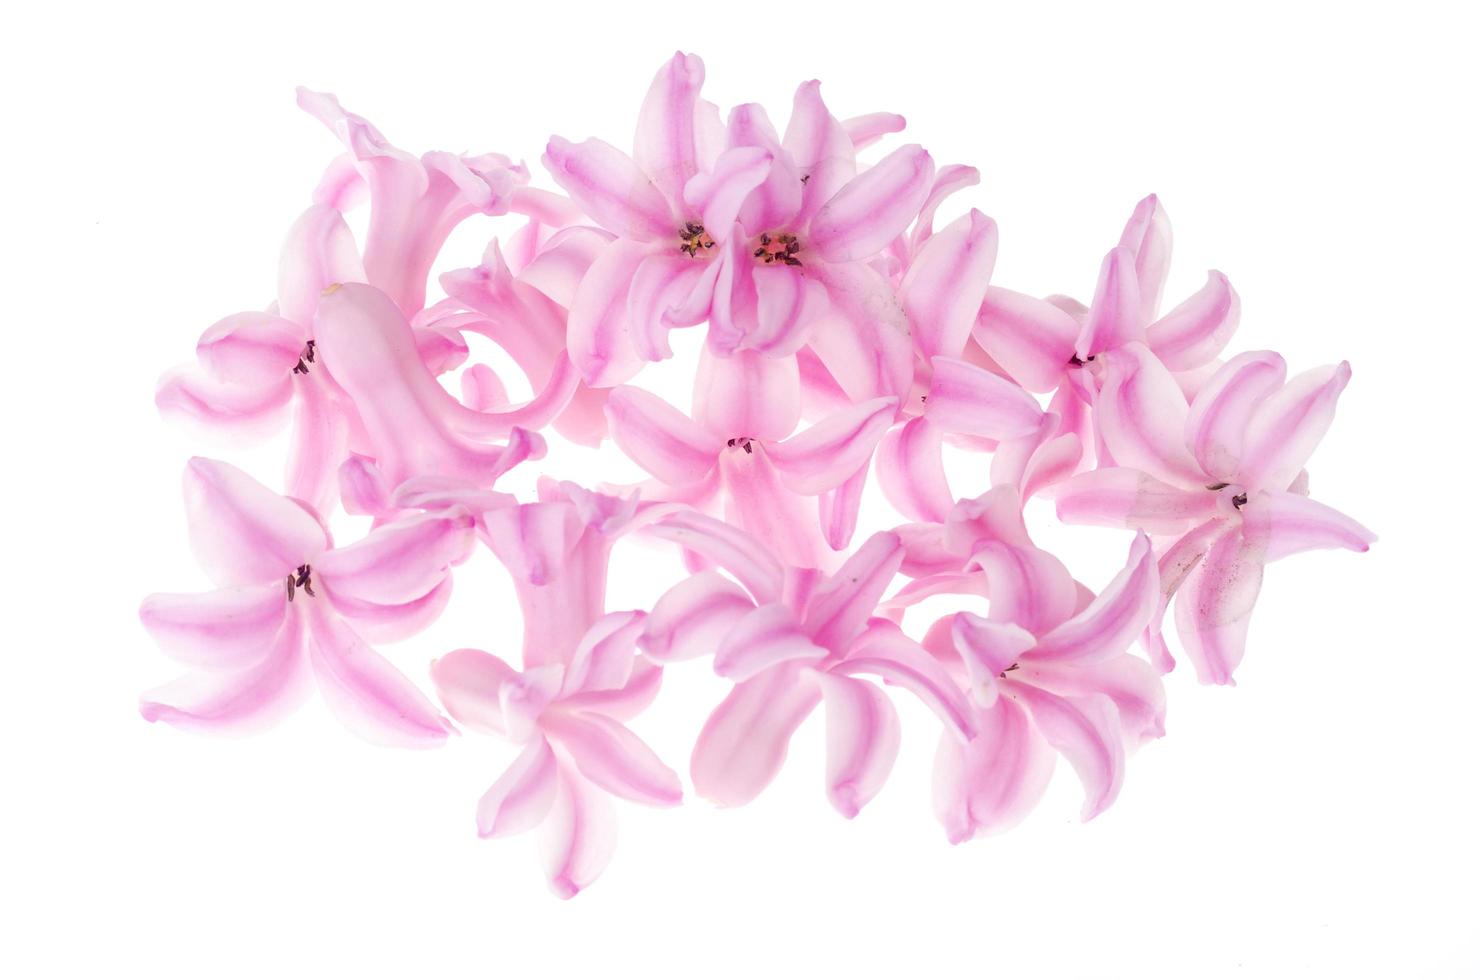 Small hyacinth flowers isolated on white background photo